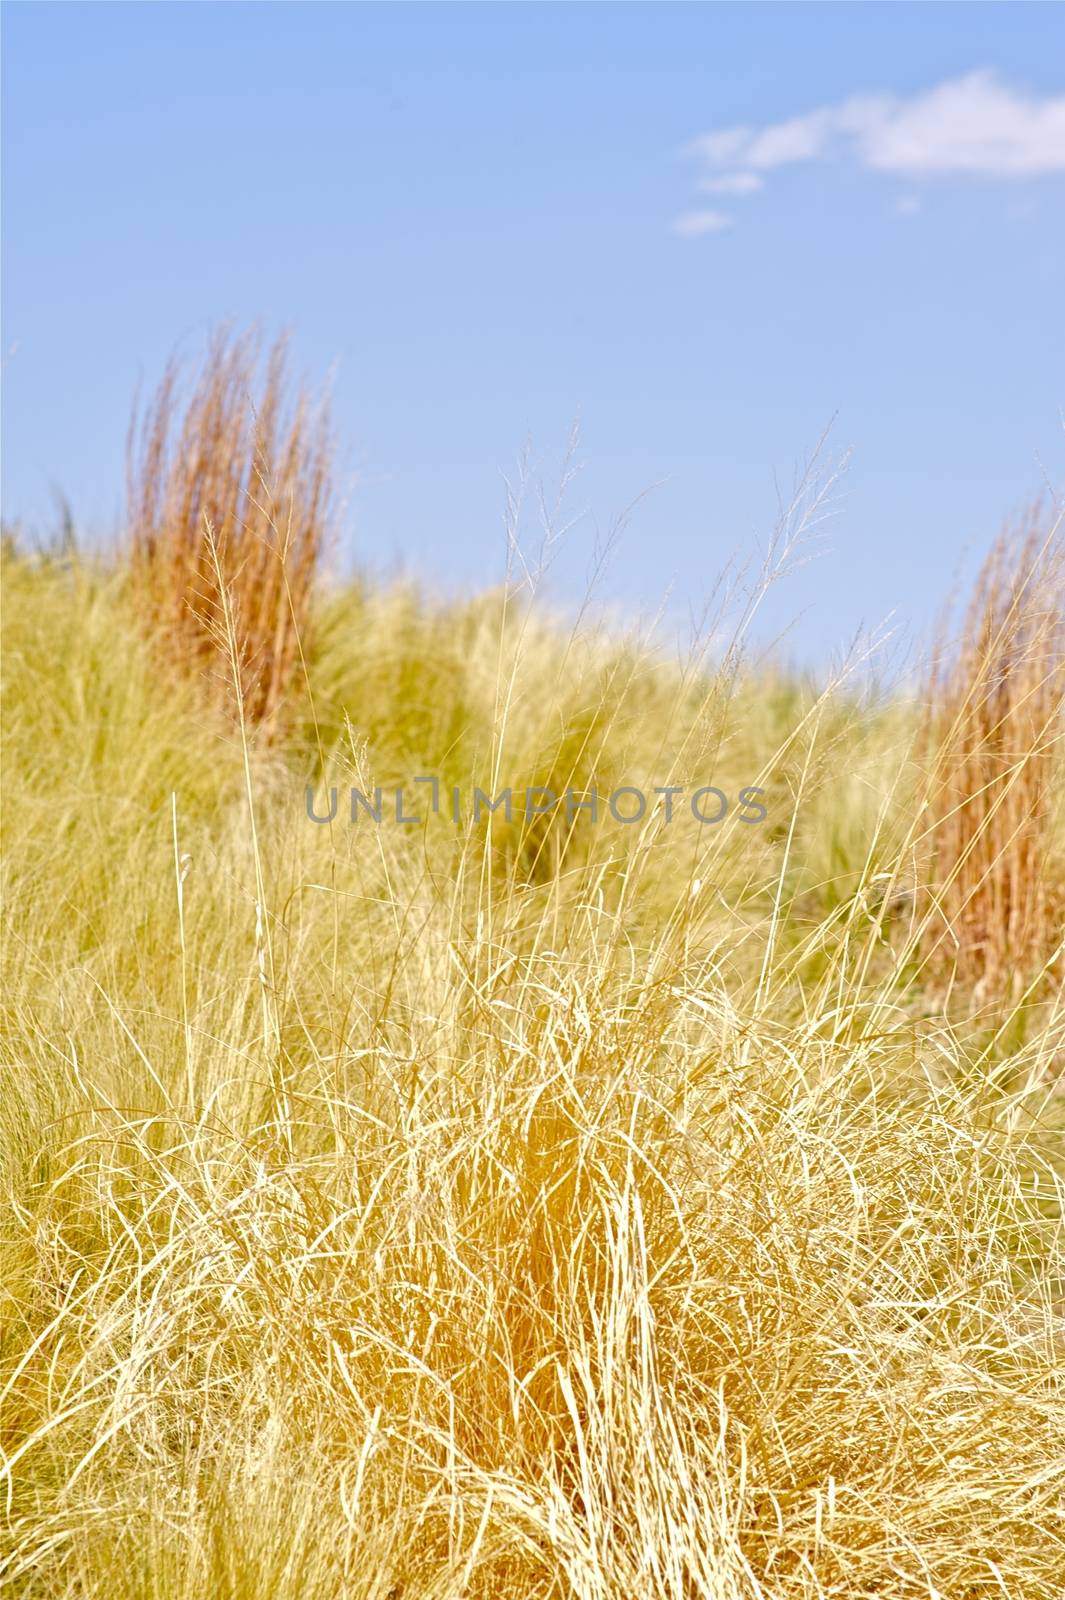 Summer Grasses by welcomia